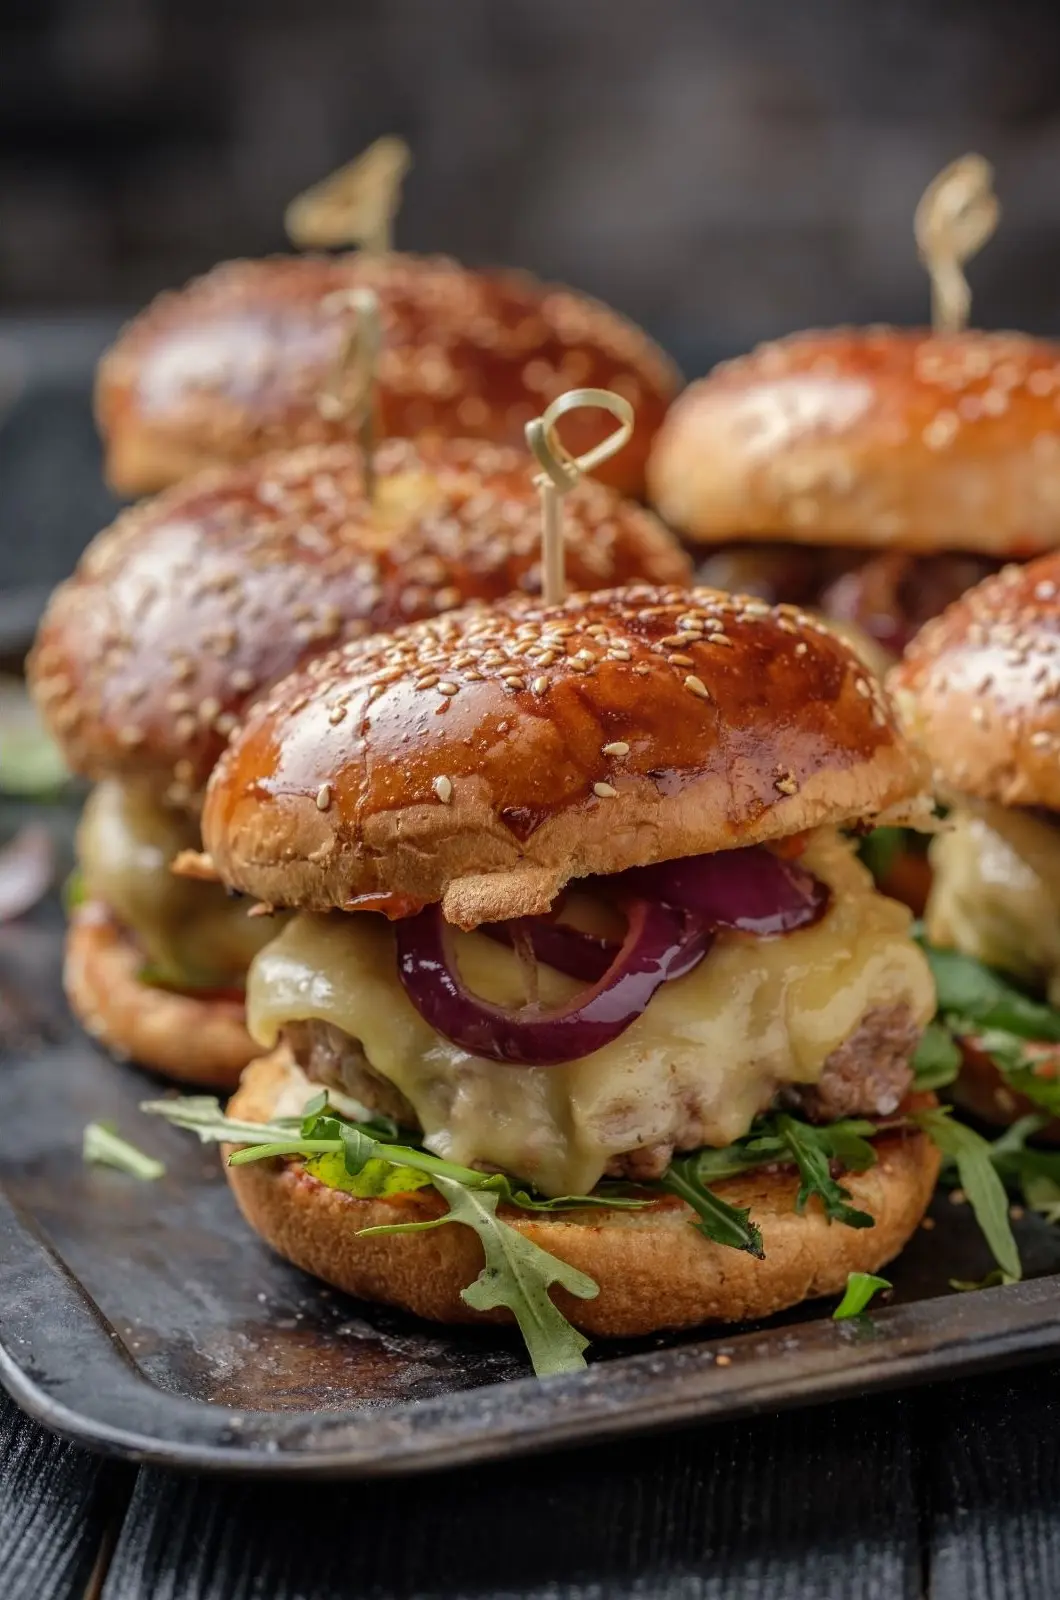 French onion hamburgers with melted cheese, red onions and arugula